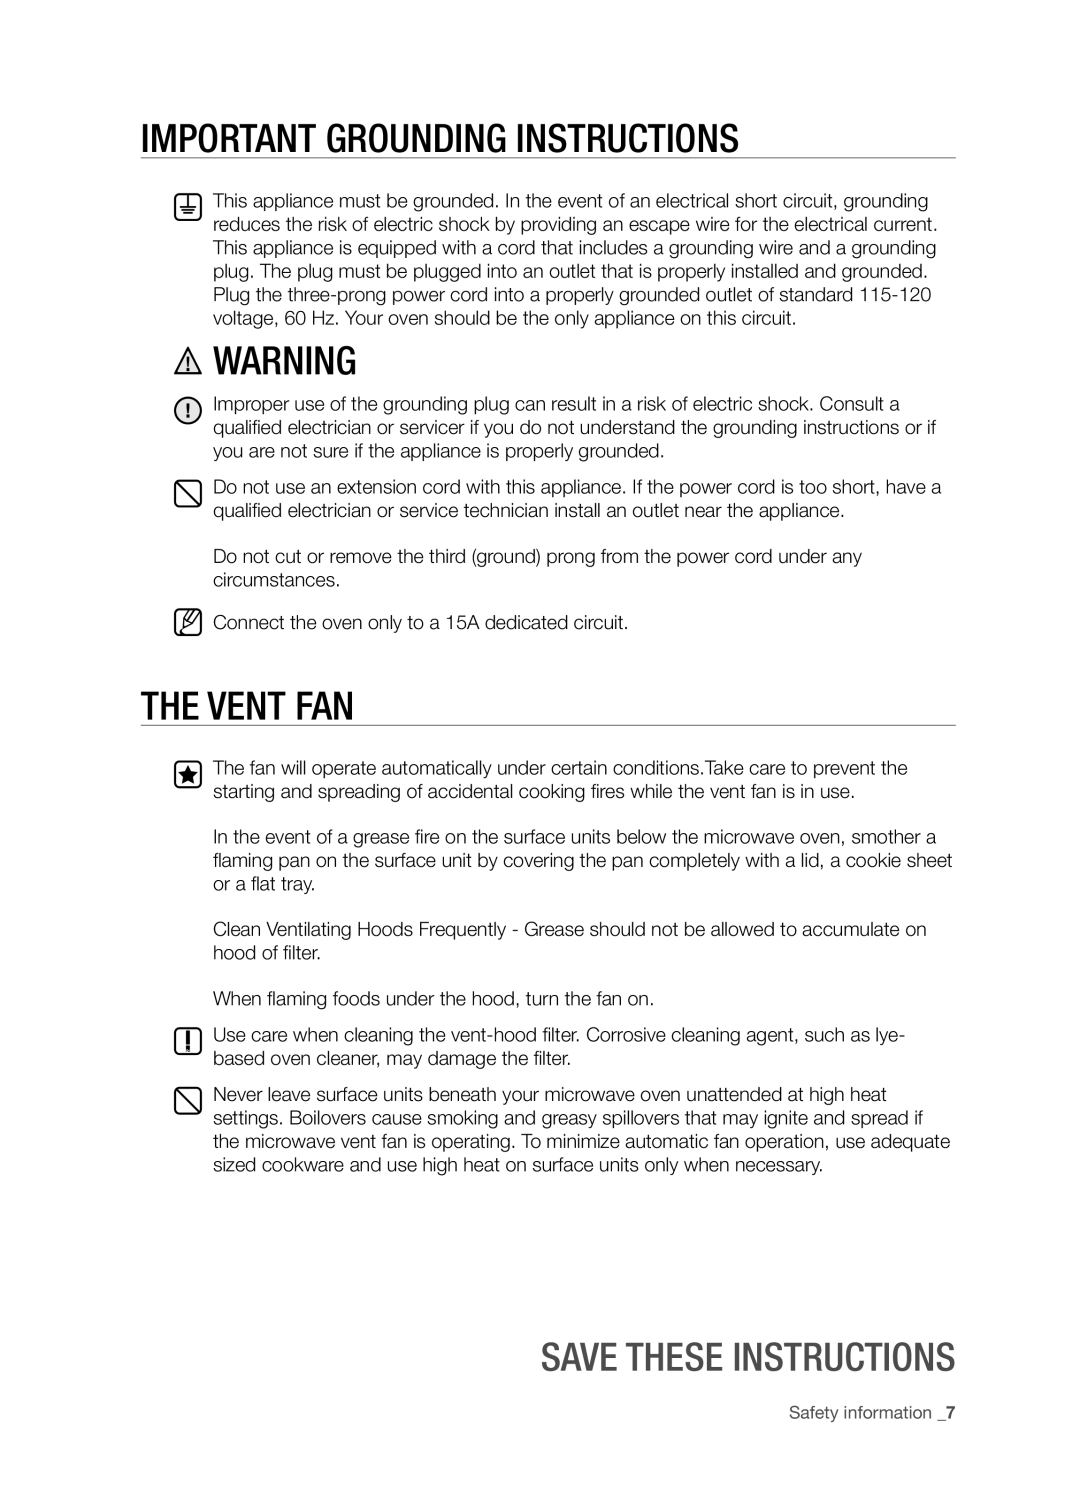 Samsung SMH6165 user manual Important grounding instructions, The vent fan, Save These Instructions 